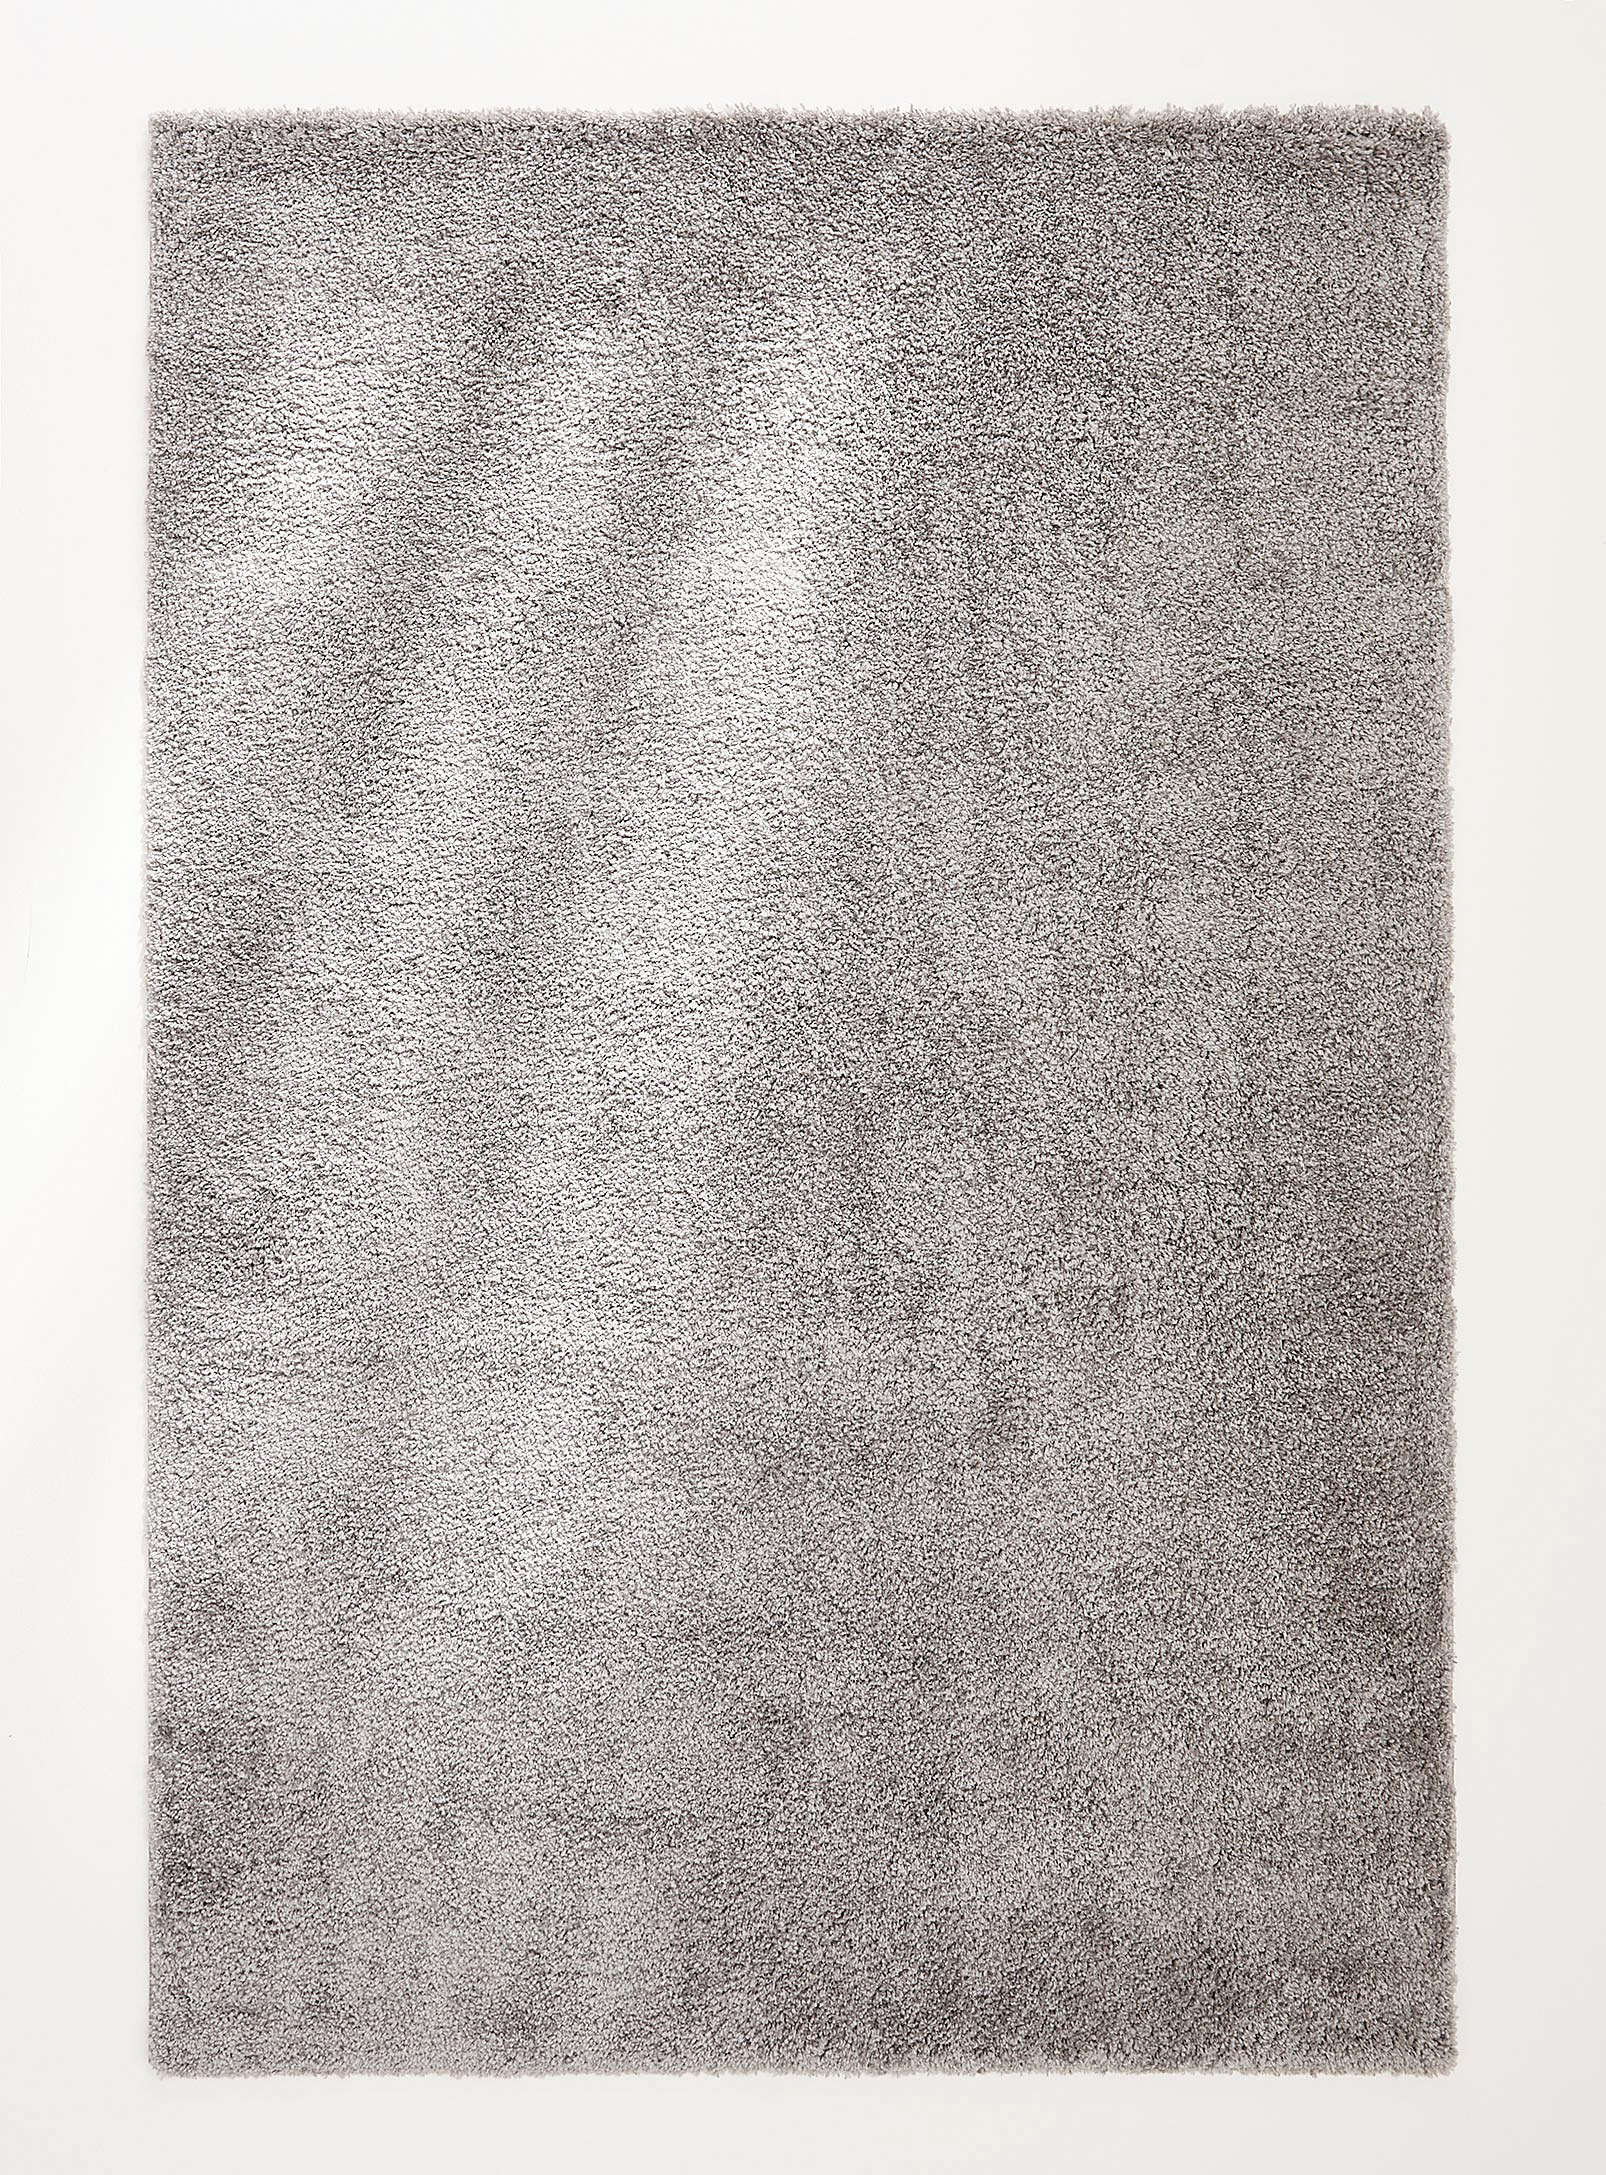 Simons Maison Nature's Essence Shag Rug See Available Sizes In Dark Grey